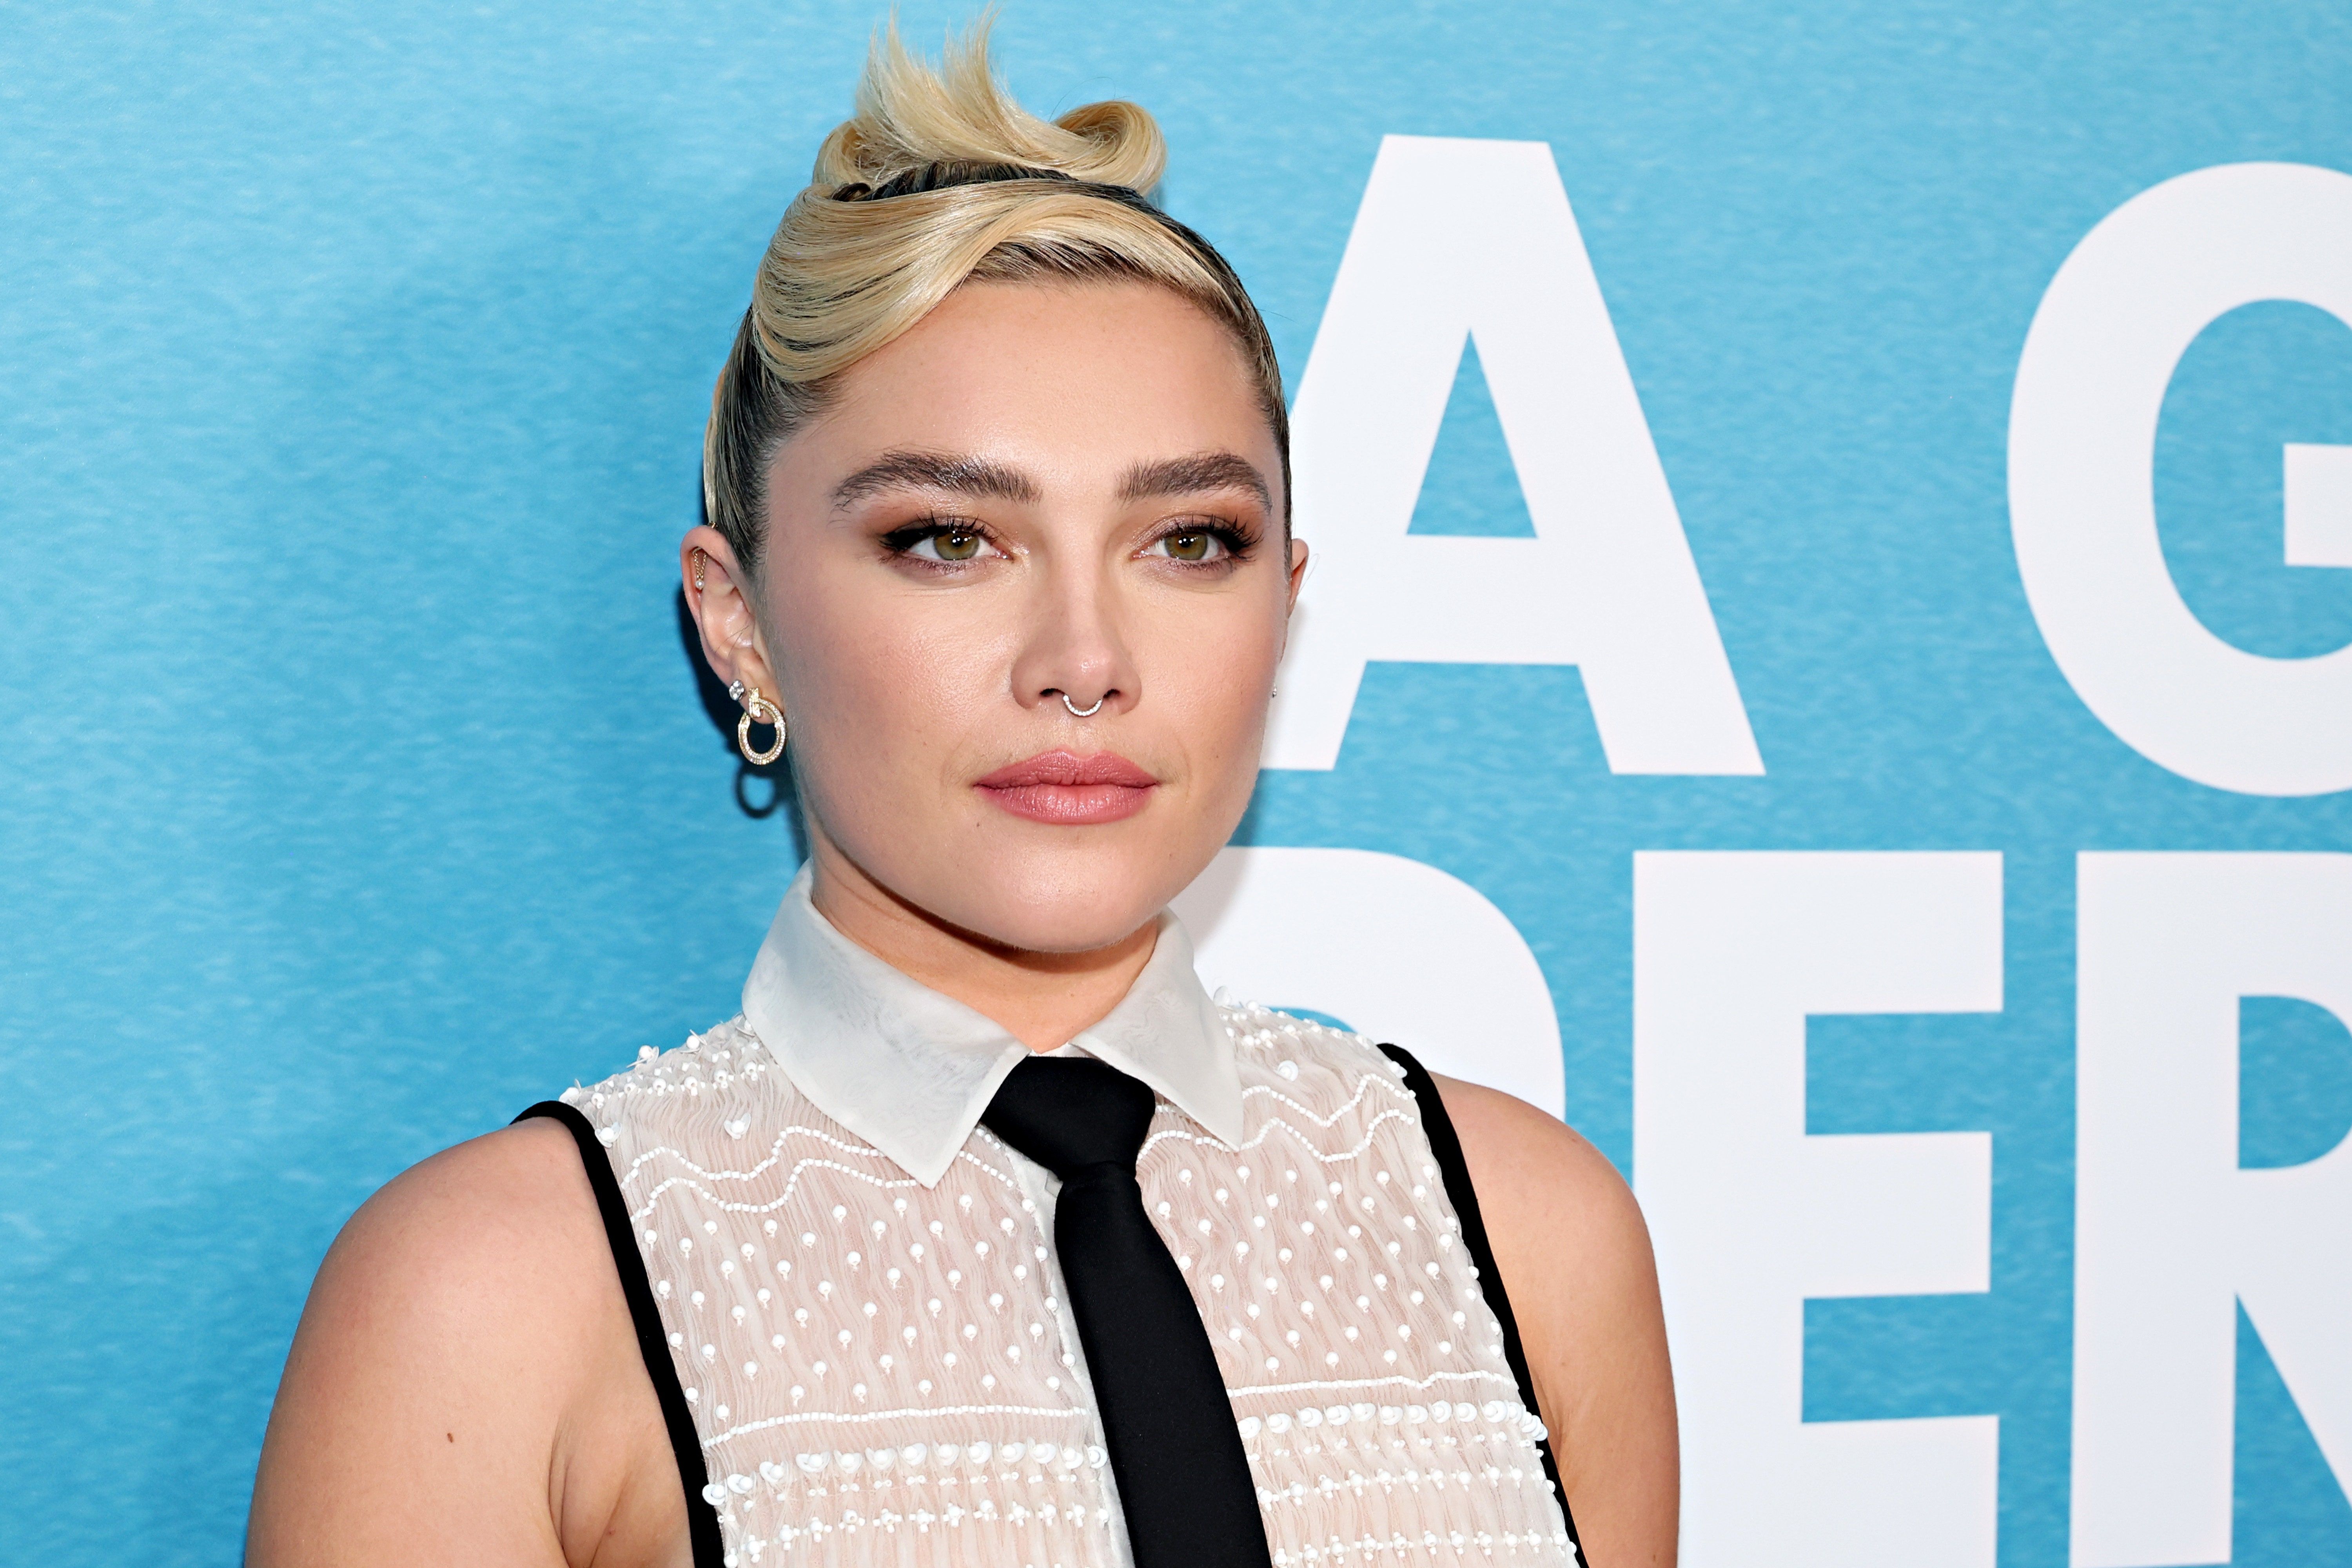 Florence Pugh Put A Twist On The Classic Shirt And Tie Combo For The Red Carpet